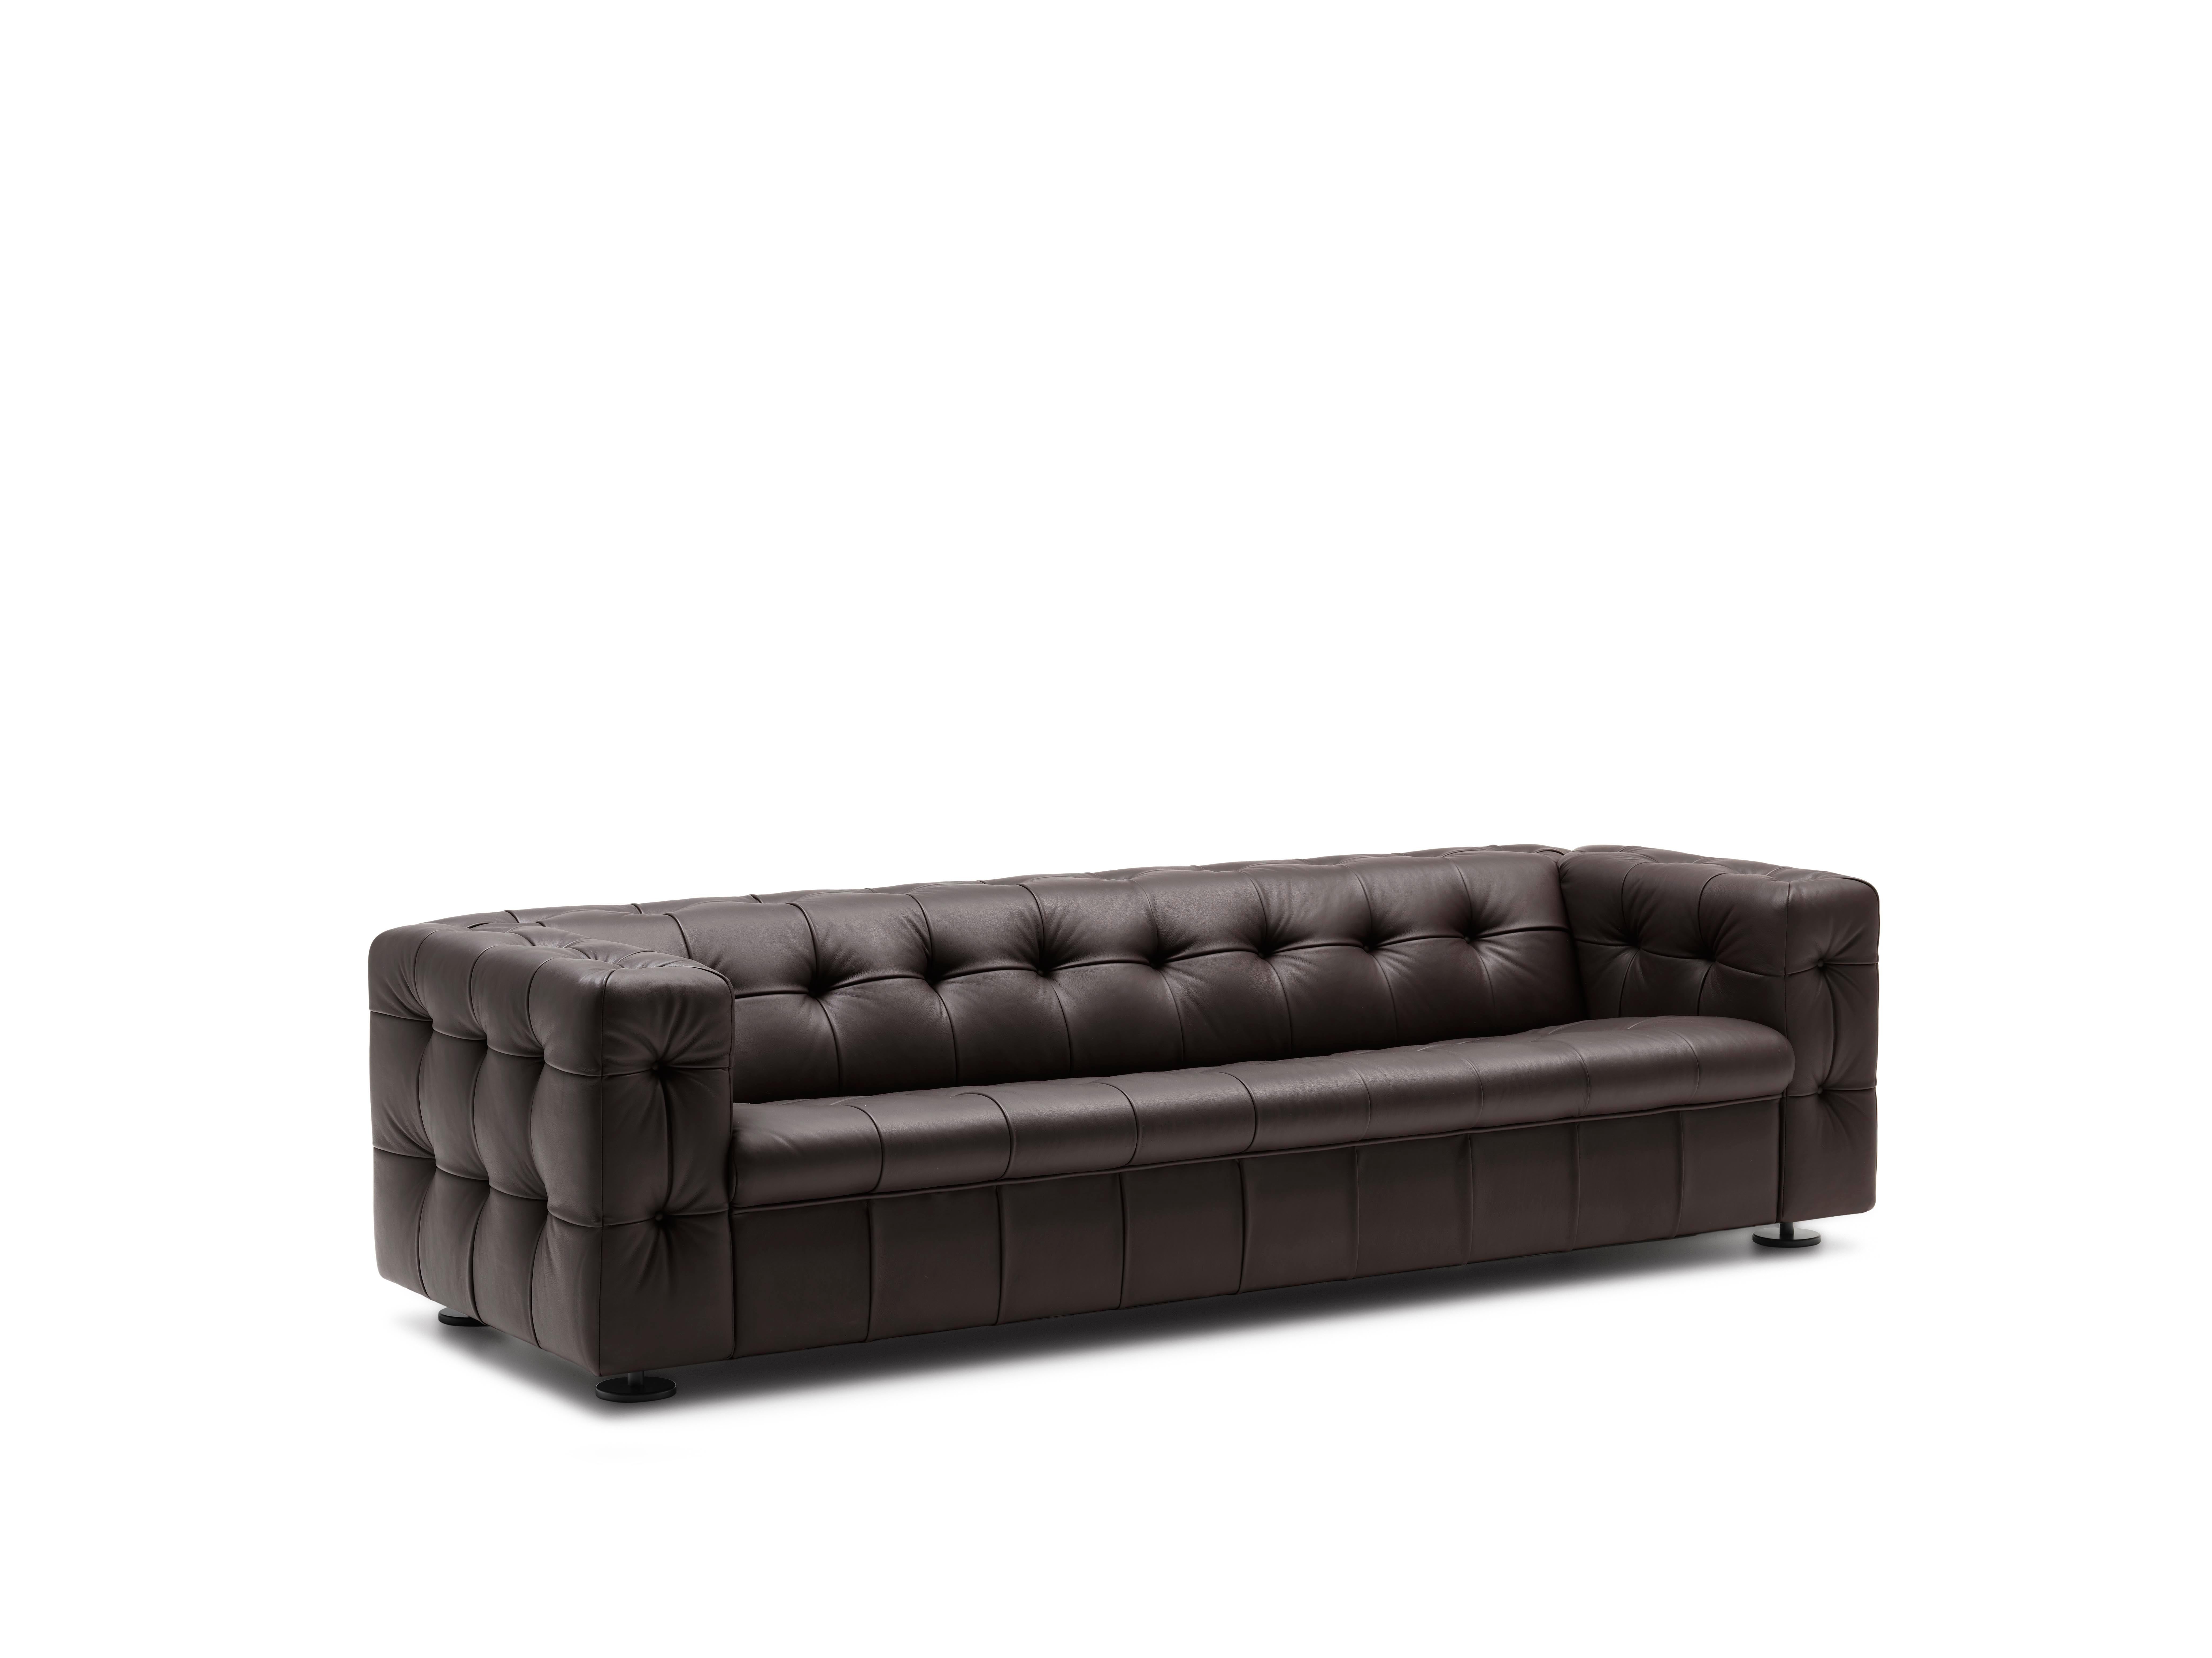 For Sale: Brown (Cigarro) RH-306 Large Tufted Leather Chesterfield Sofa by Robert Haussmann 2